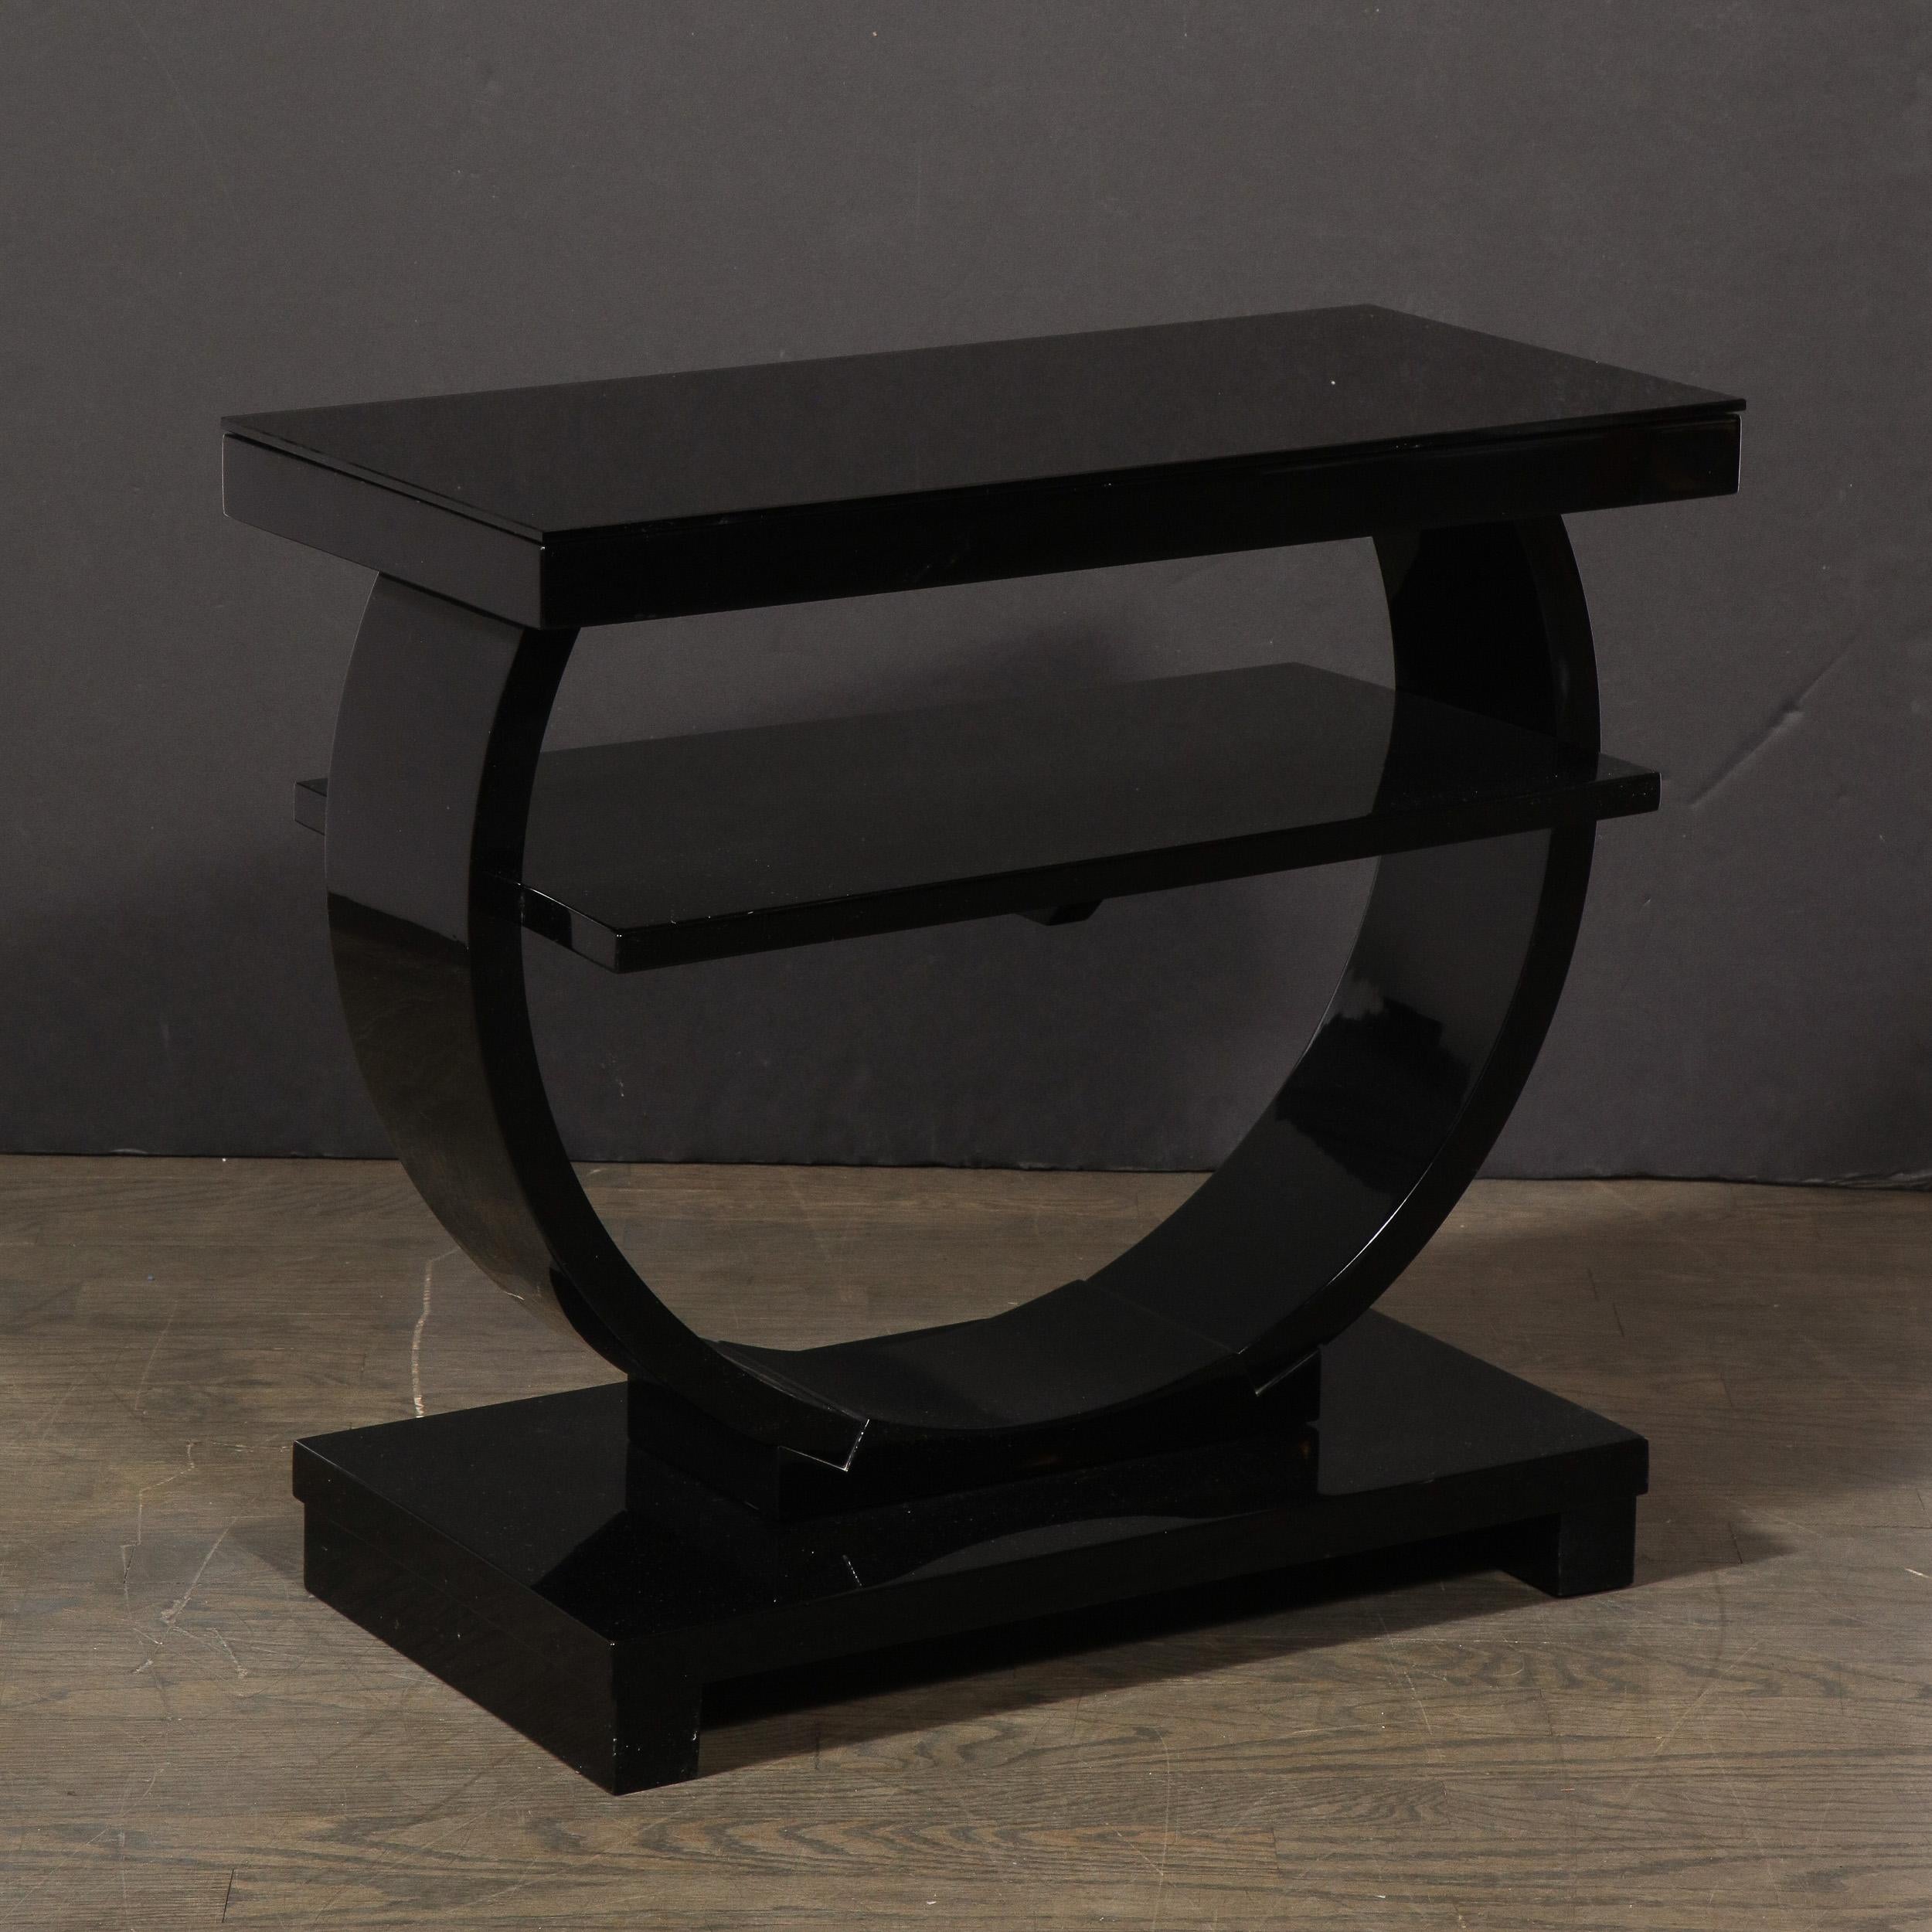 This fine and graphic Art Deco Machine Age side table was realized in the United States, circa 1935. It features a geometric open demilune form pierced through the center with a rectangular tier. The top of the table is another rectangular form